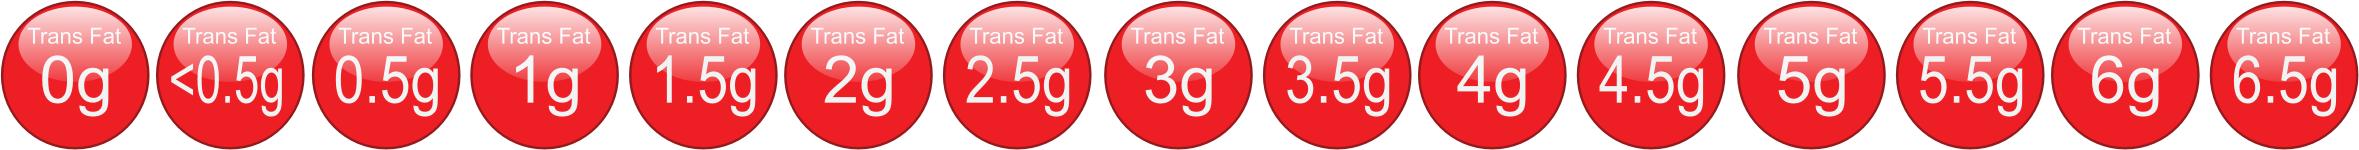 Trans Fat icons - 0g to 6.5g icons